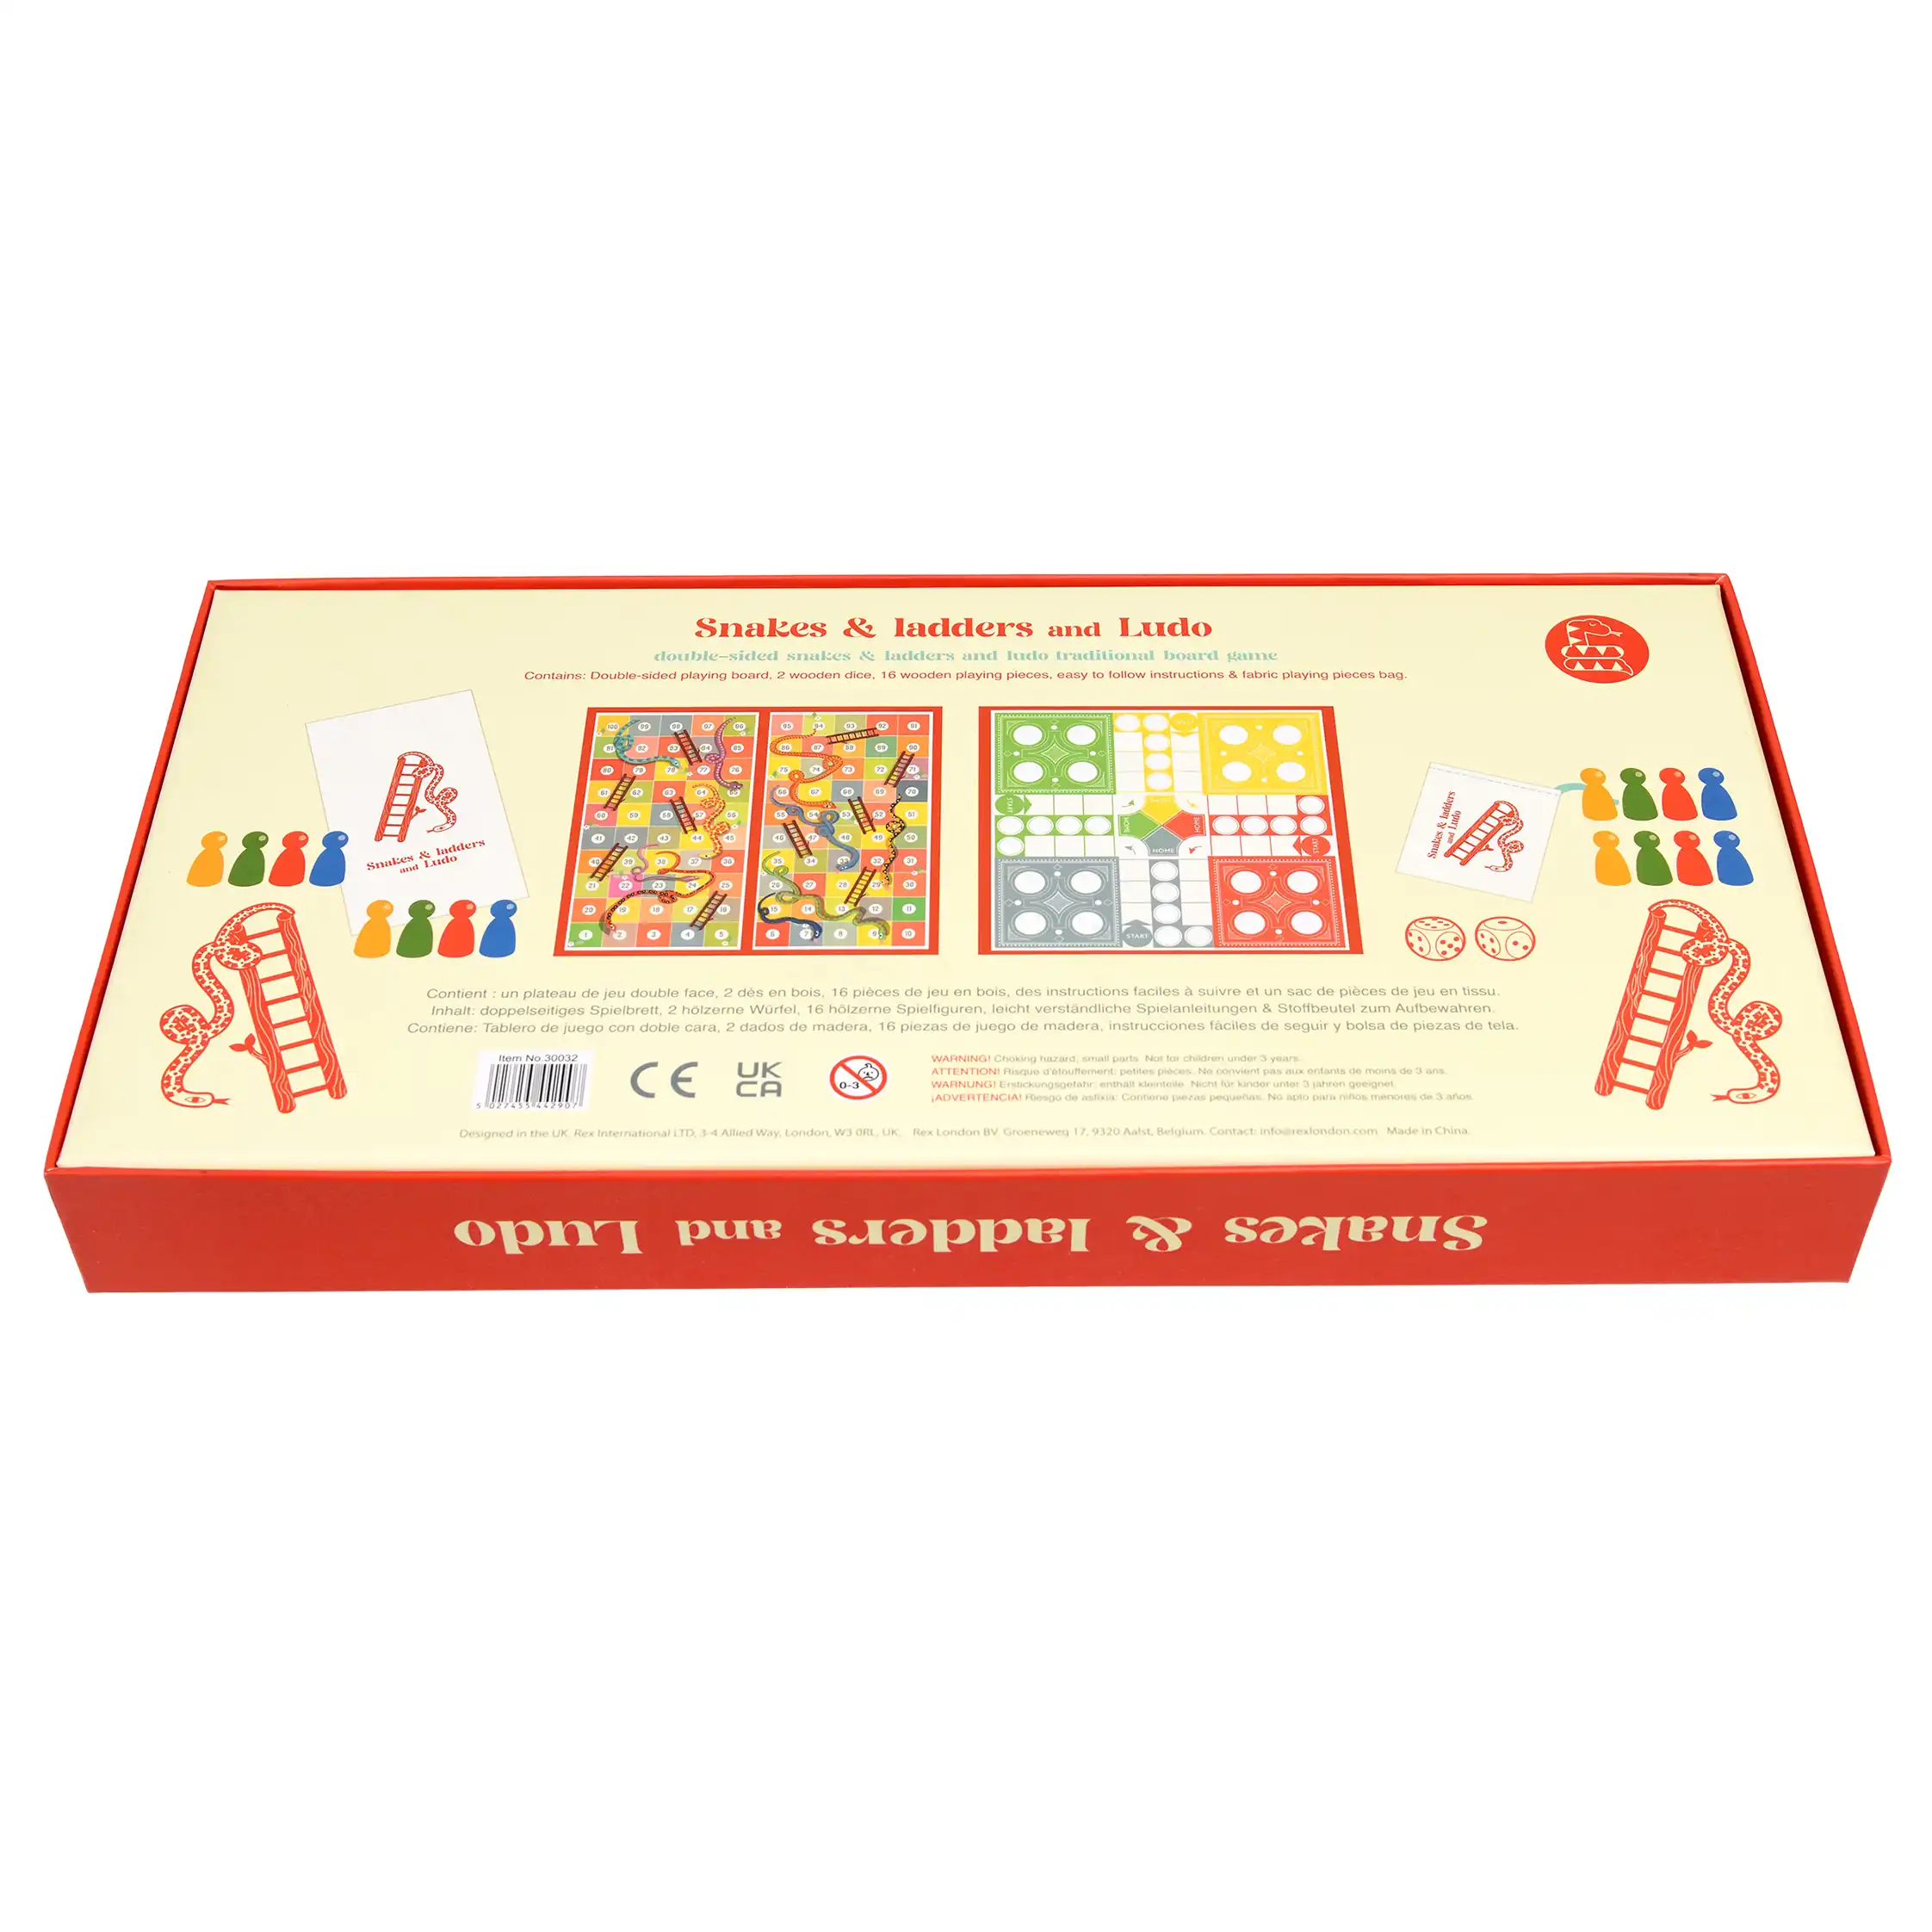 snakes & ladders and ludo double-sided board game